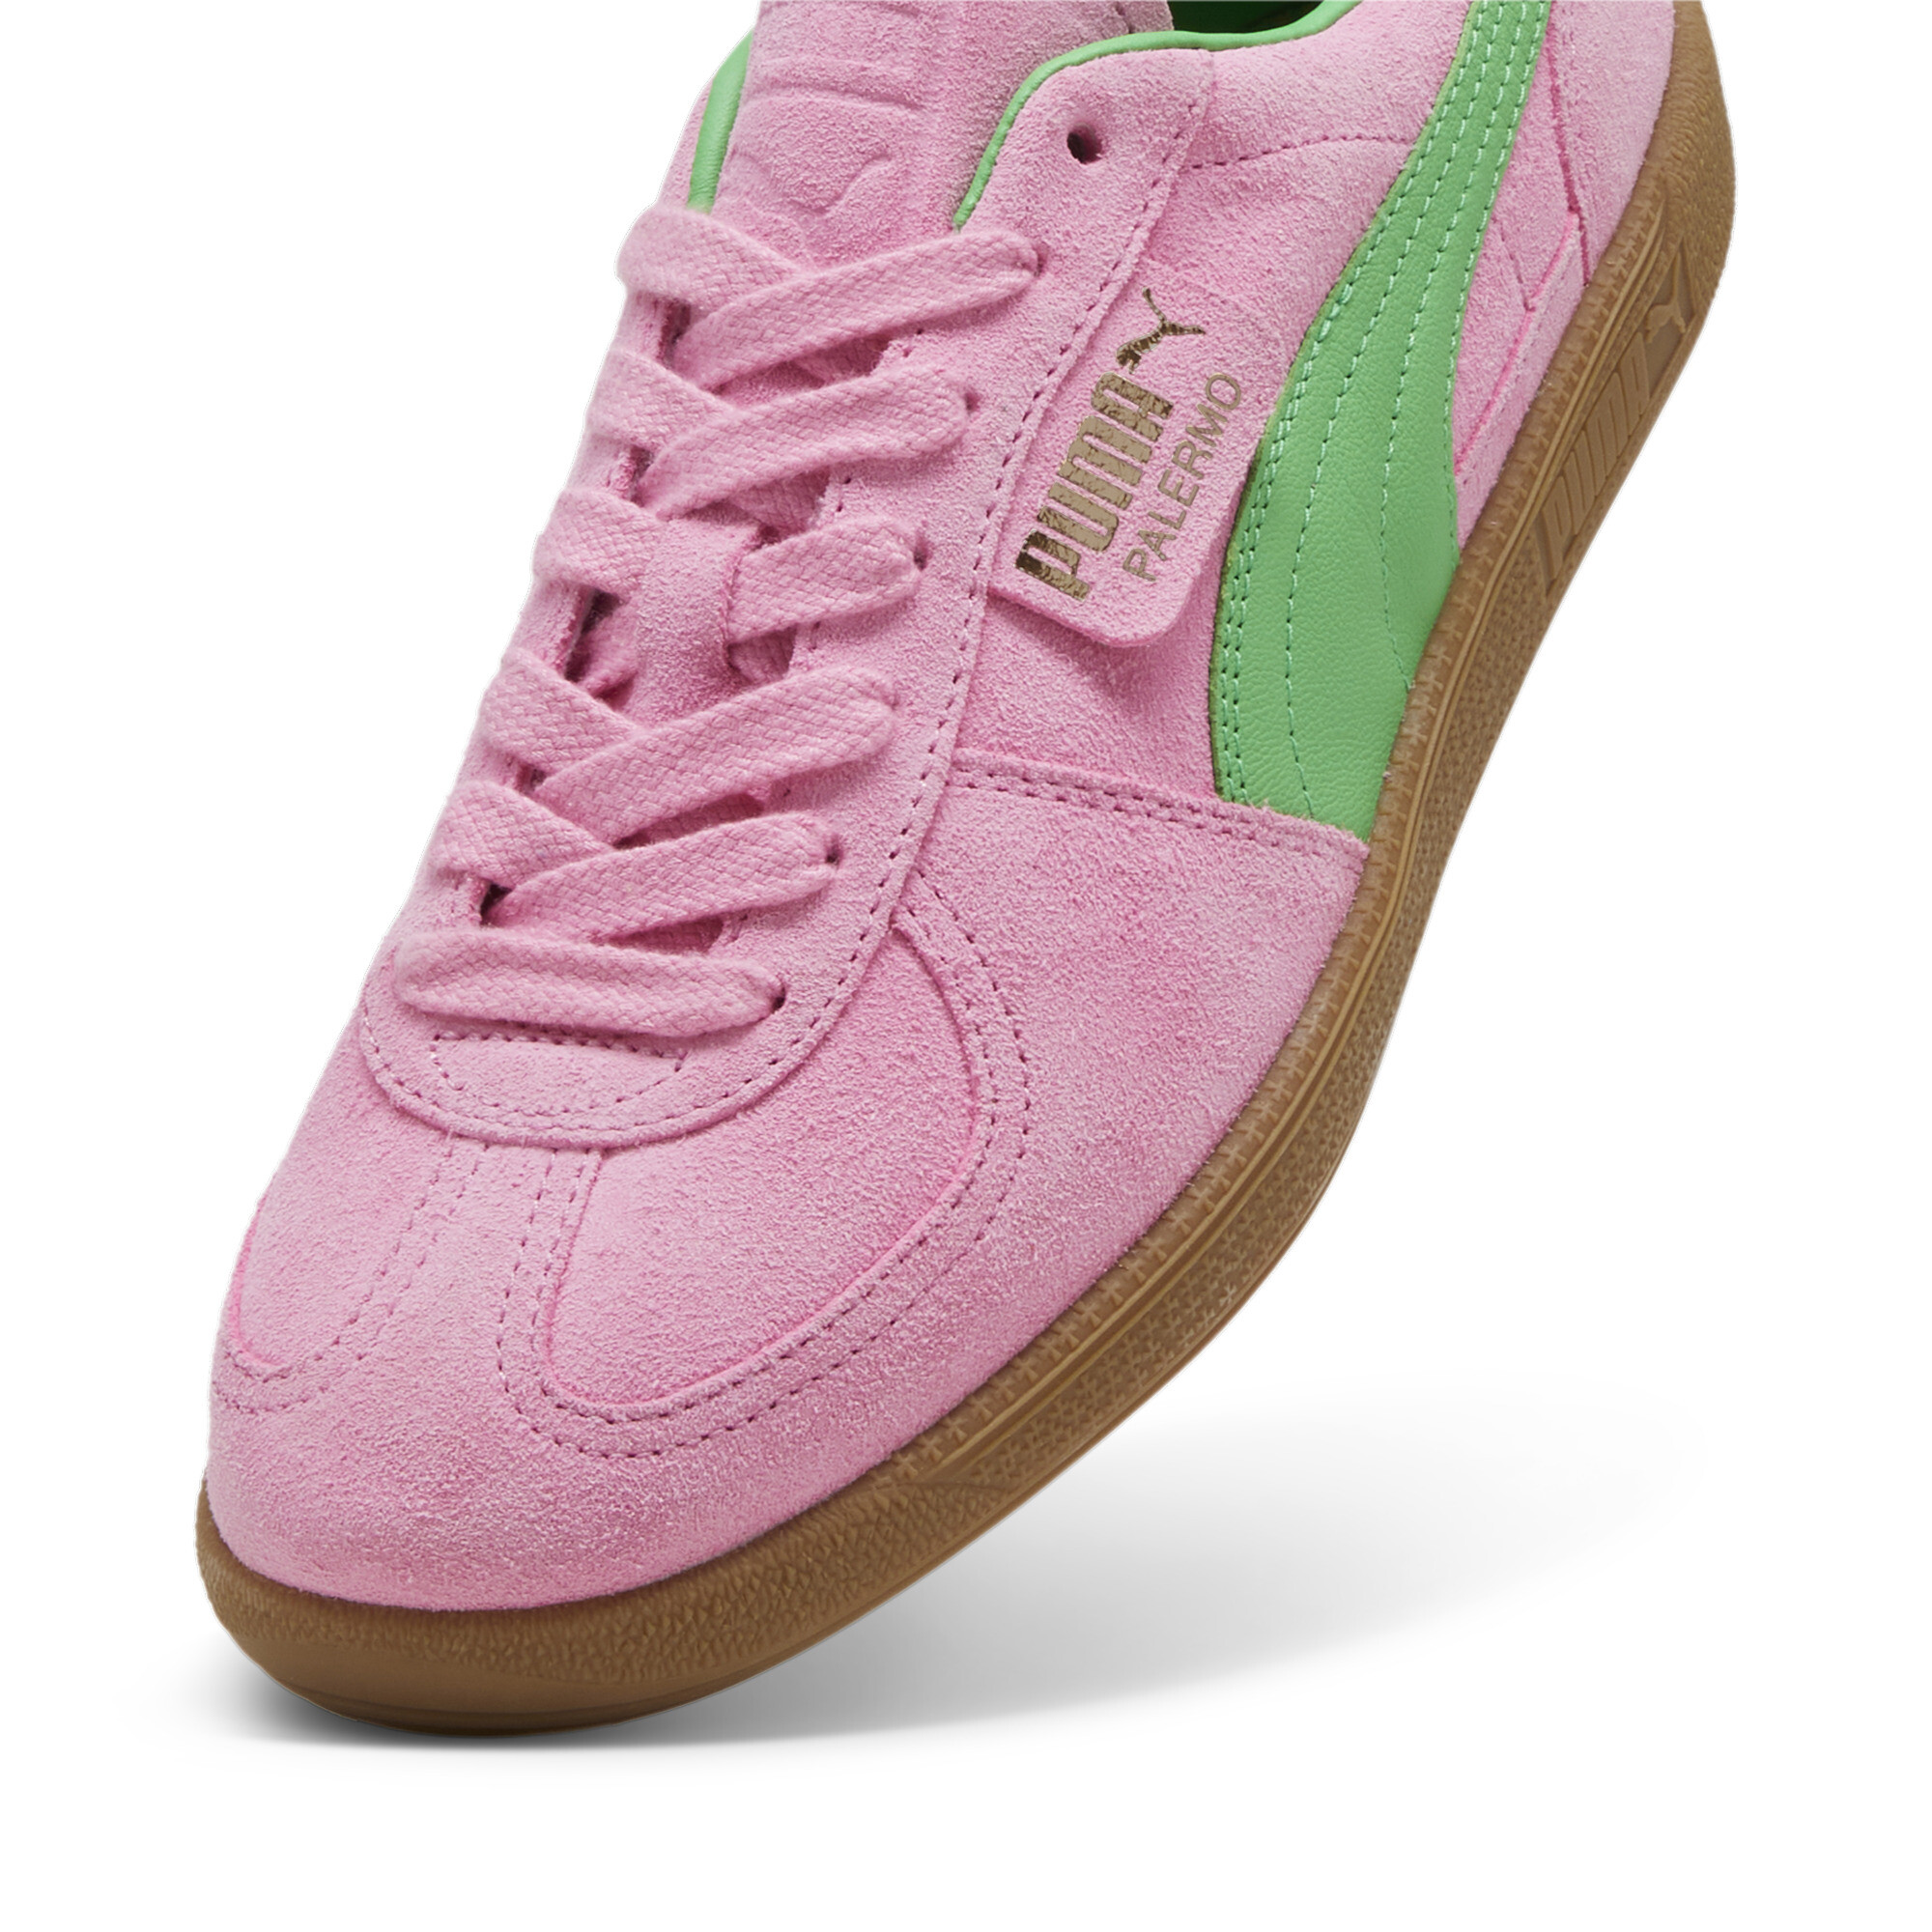 Men's PUMA Palermo Special Shoes In Pink, Size EU 40